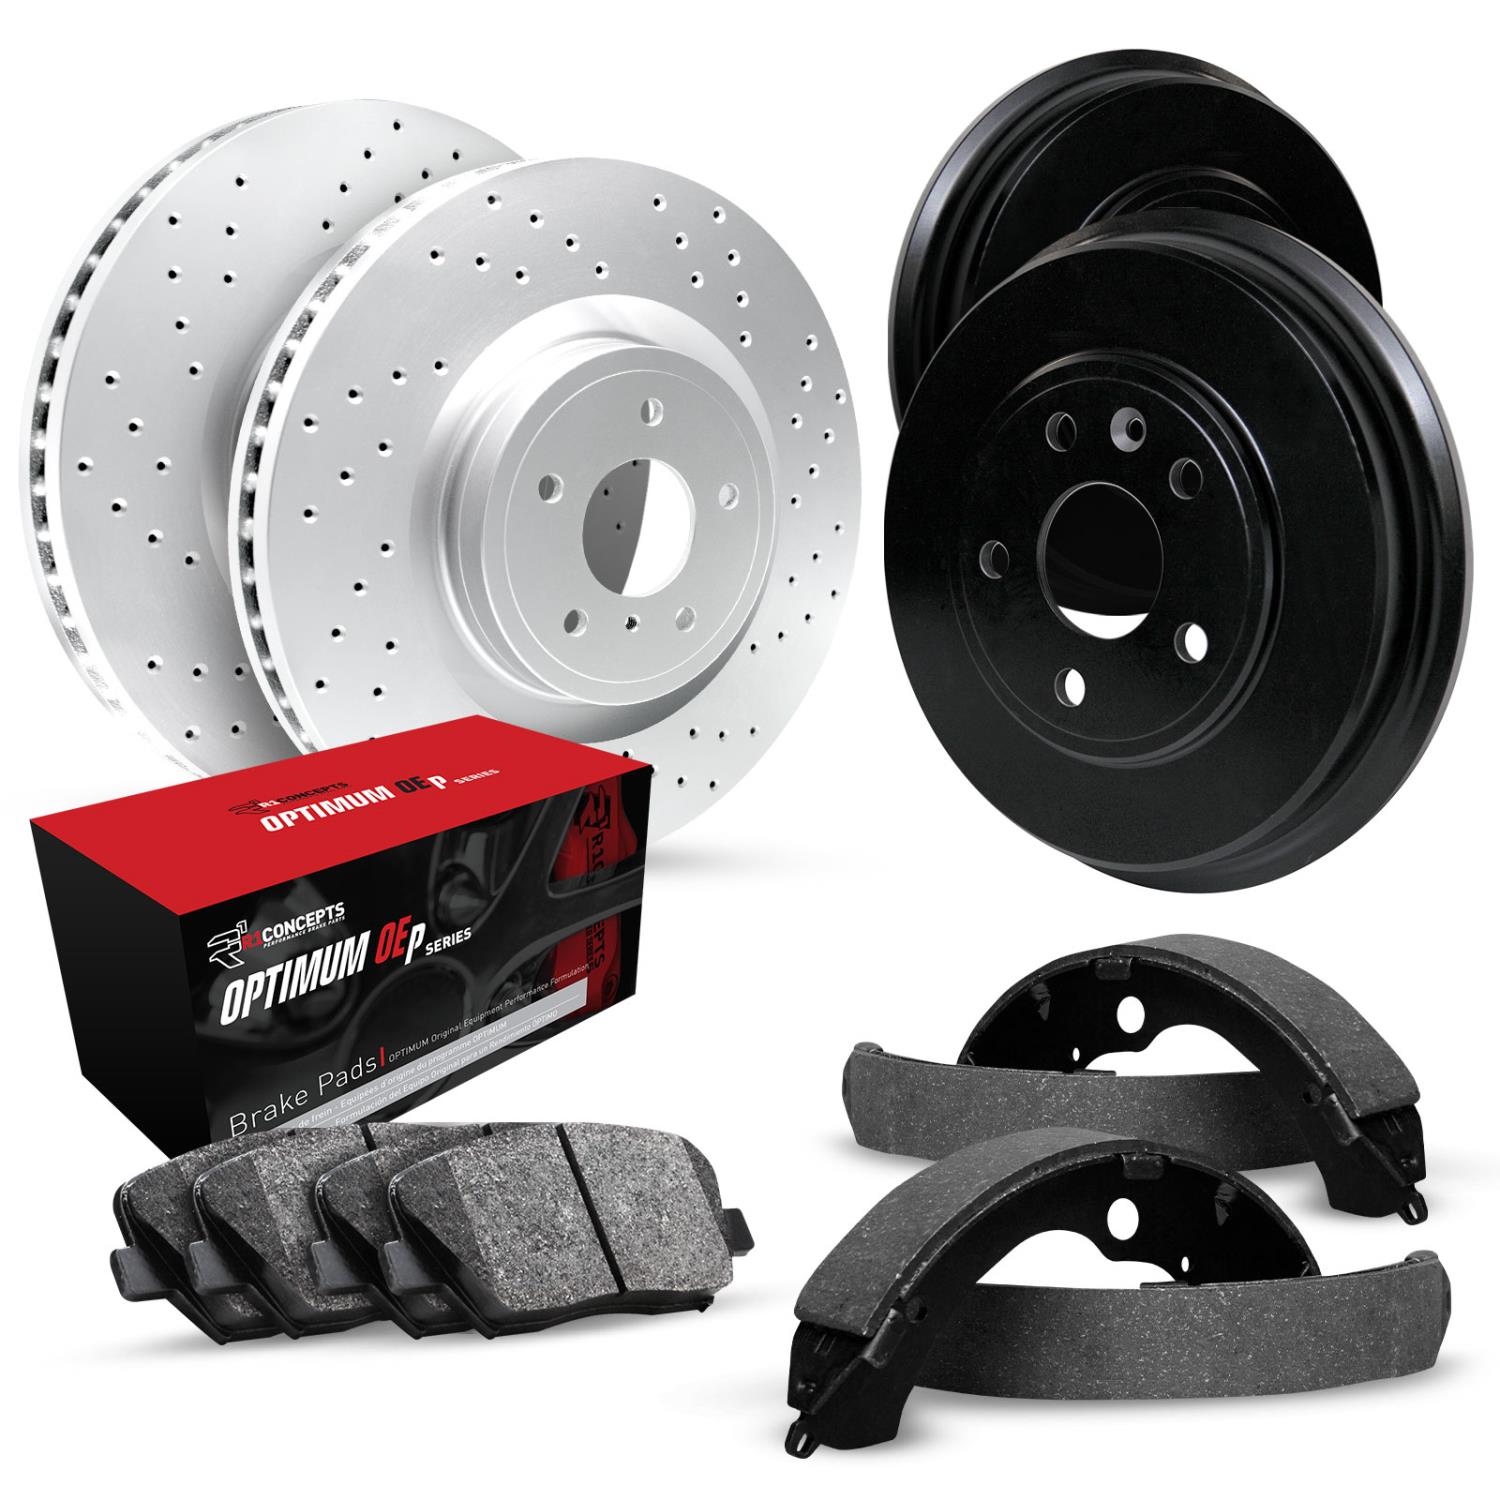 GEO-Carbon Drilled Brake Rotor & Drum Set w/Optimum OE Pads & Shoes, 1990-1991 Acura/Honda, Position: Front & Rear